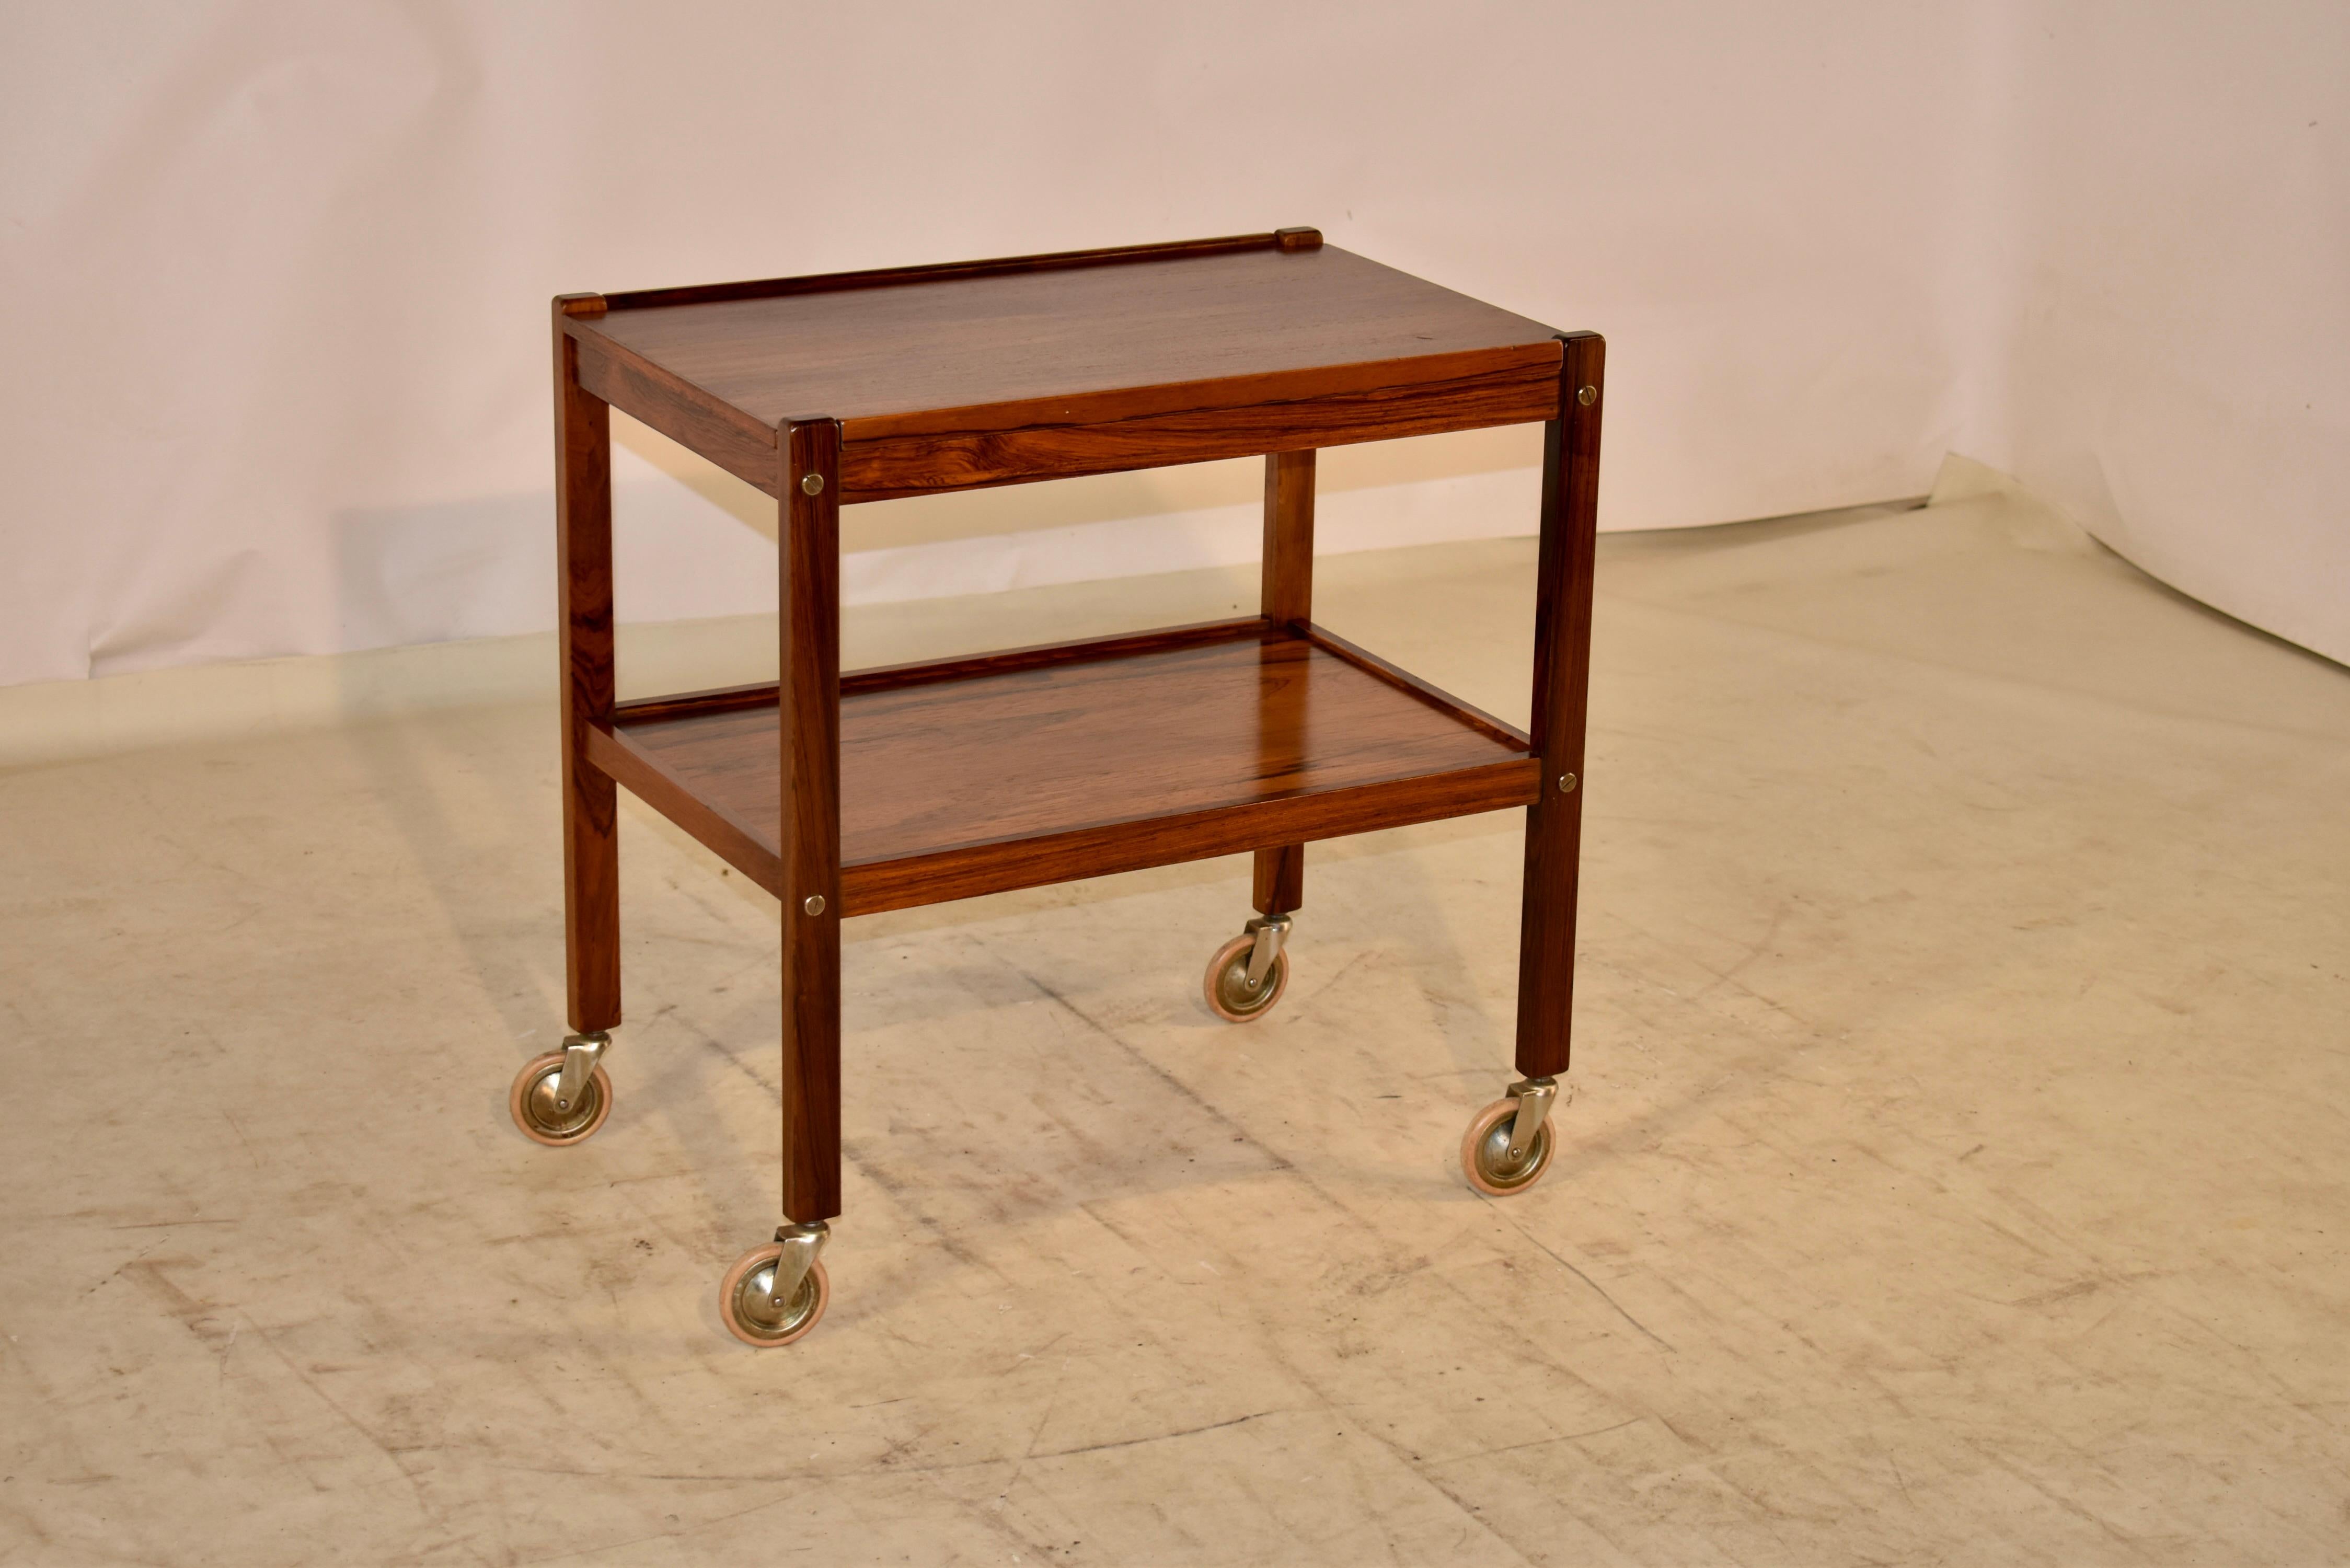 Mid-century rosewood bar or drinks cart from England. This cart is very elegant in its simplicity. The cart has simple and modern lines, to compliment any decor. The top is removable, and has gorgeous graining. It is supported on its original